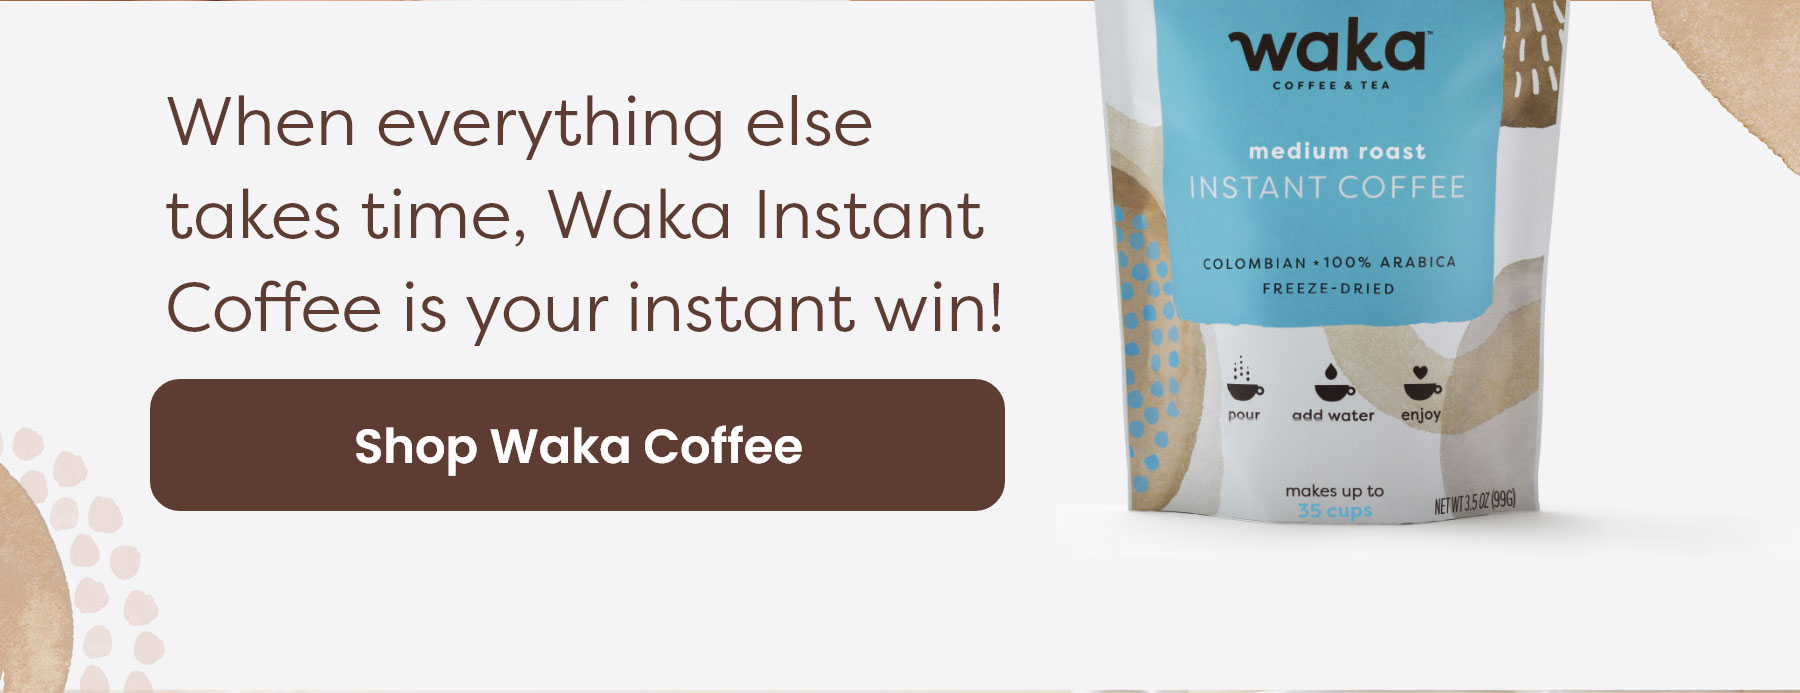 When everything else takes time, Waka Instant Coffee is your instant win! [Shop Waka Coffee]